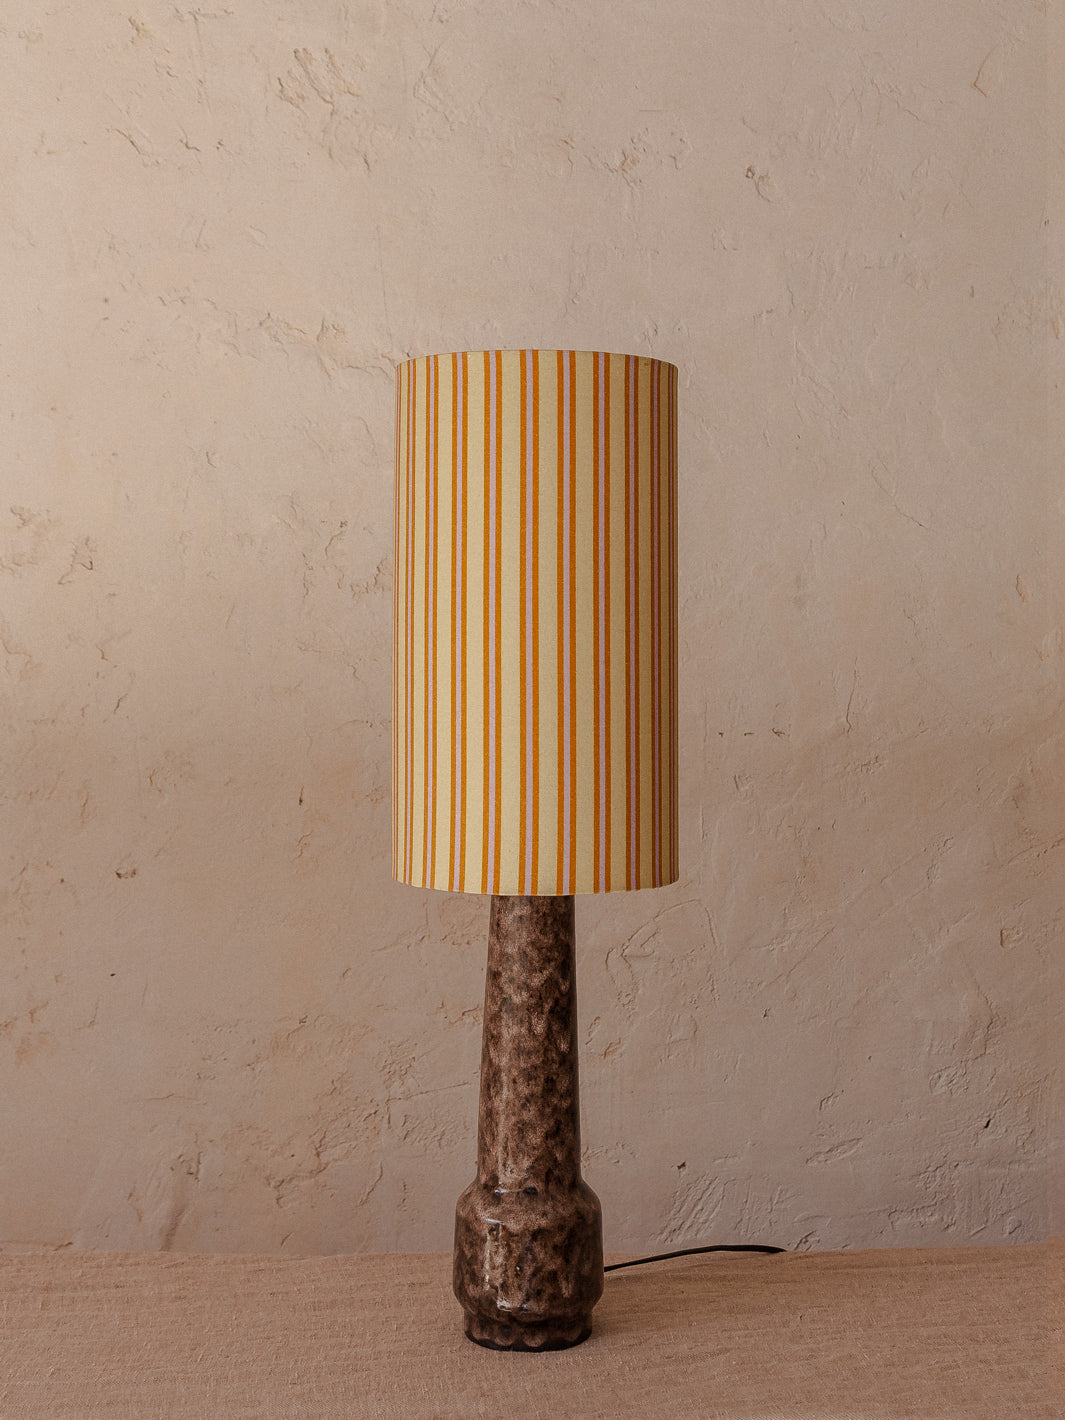 Mauve stoneware lamp with striped shade